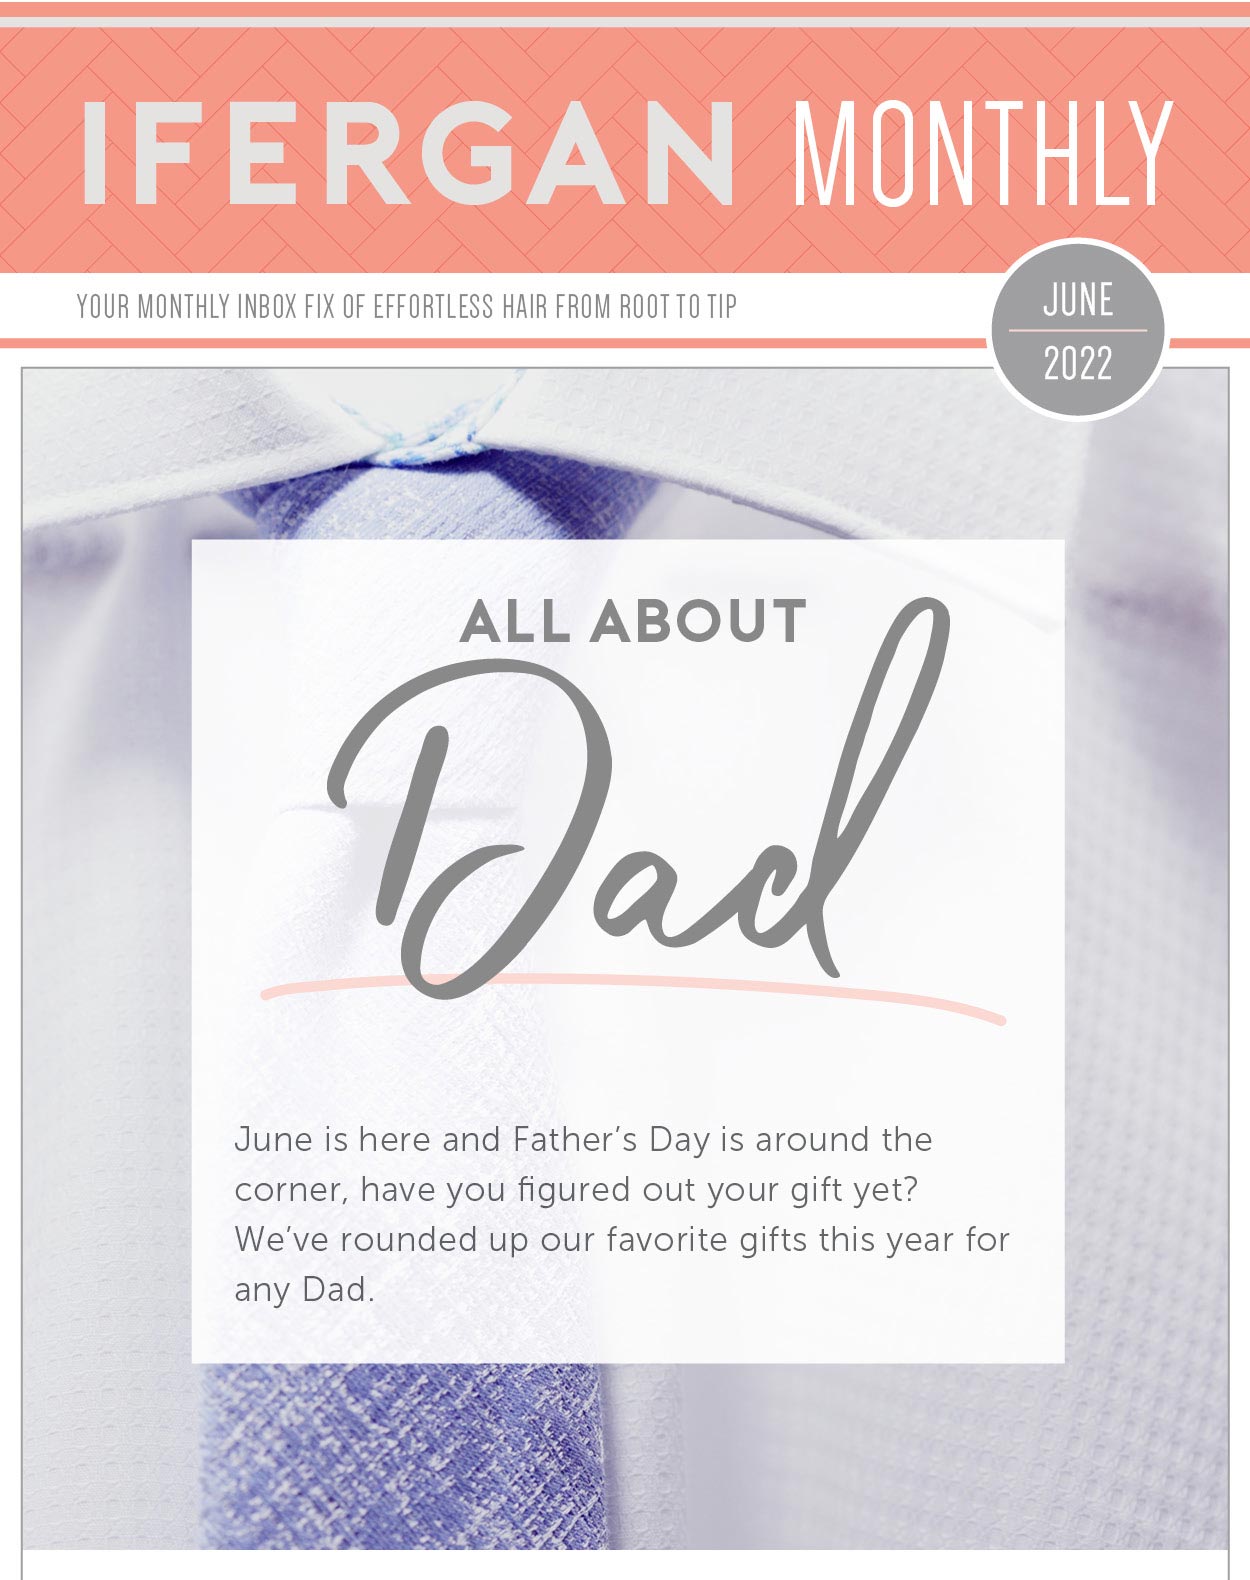 June Newsletter All About Dads: The Charles Ifergan Father’s Day Gift Guide June is here and Father's Day is around the corner, have you figured out your gift yet? We’ve rounded up our favorite gifts this year for any Dad! 